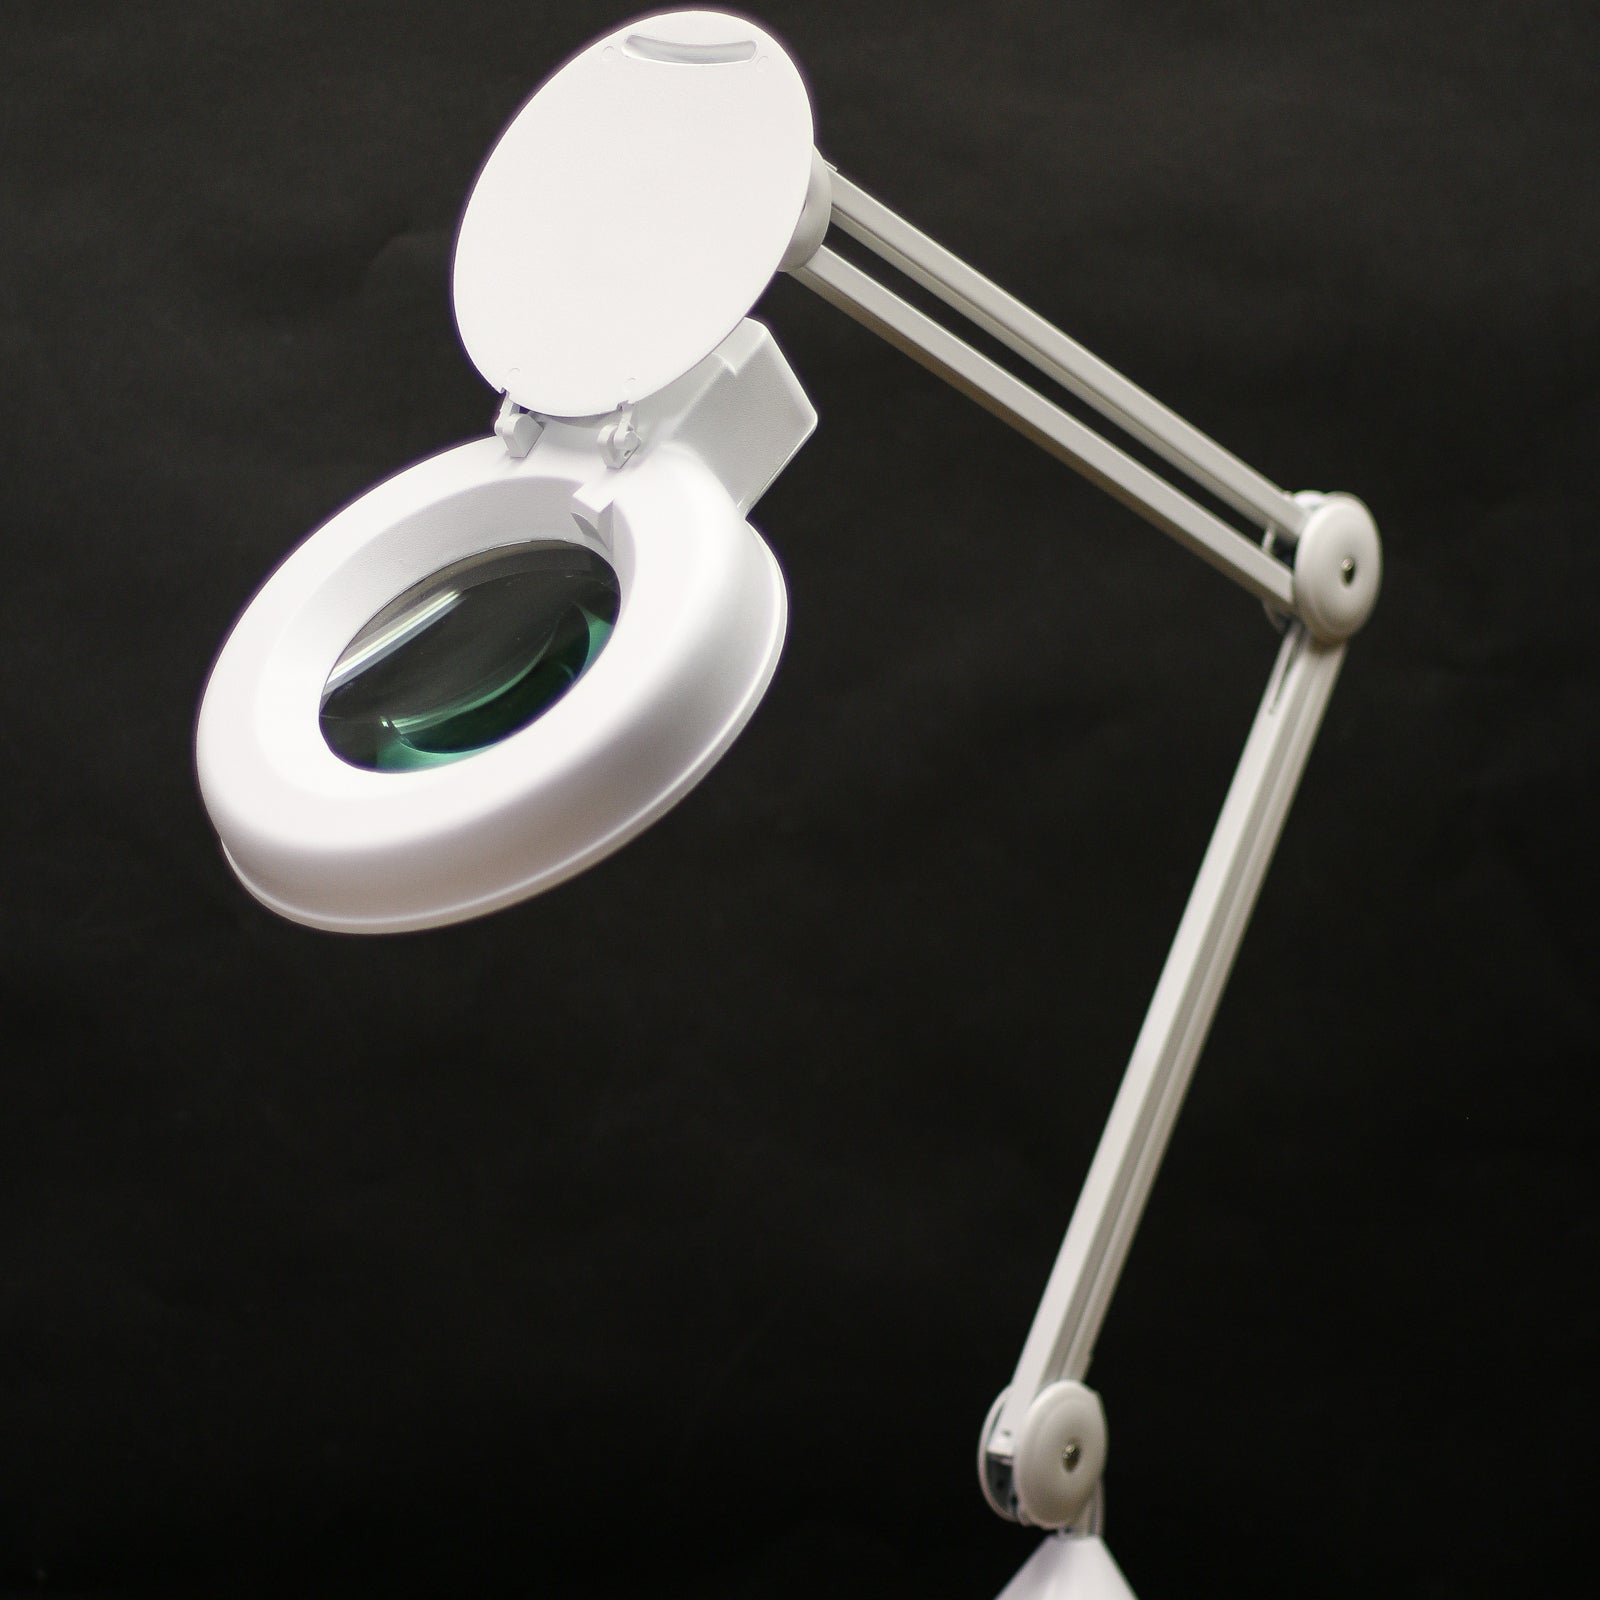 Articulated LED Lamp with Magnifier - Micro - Mark Magnifiers